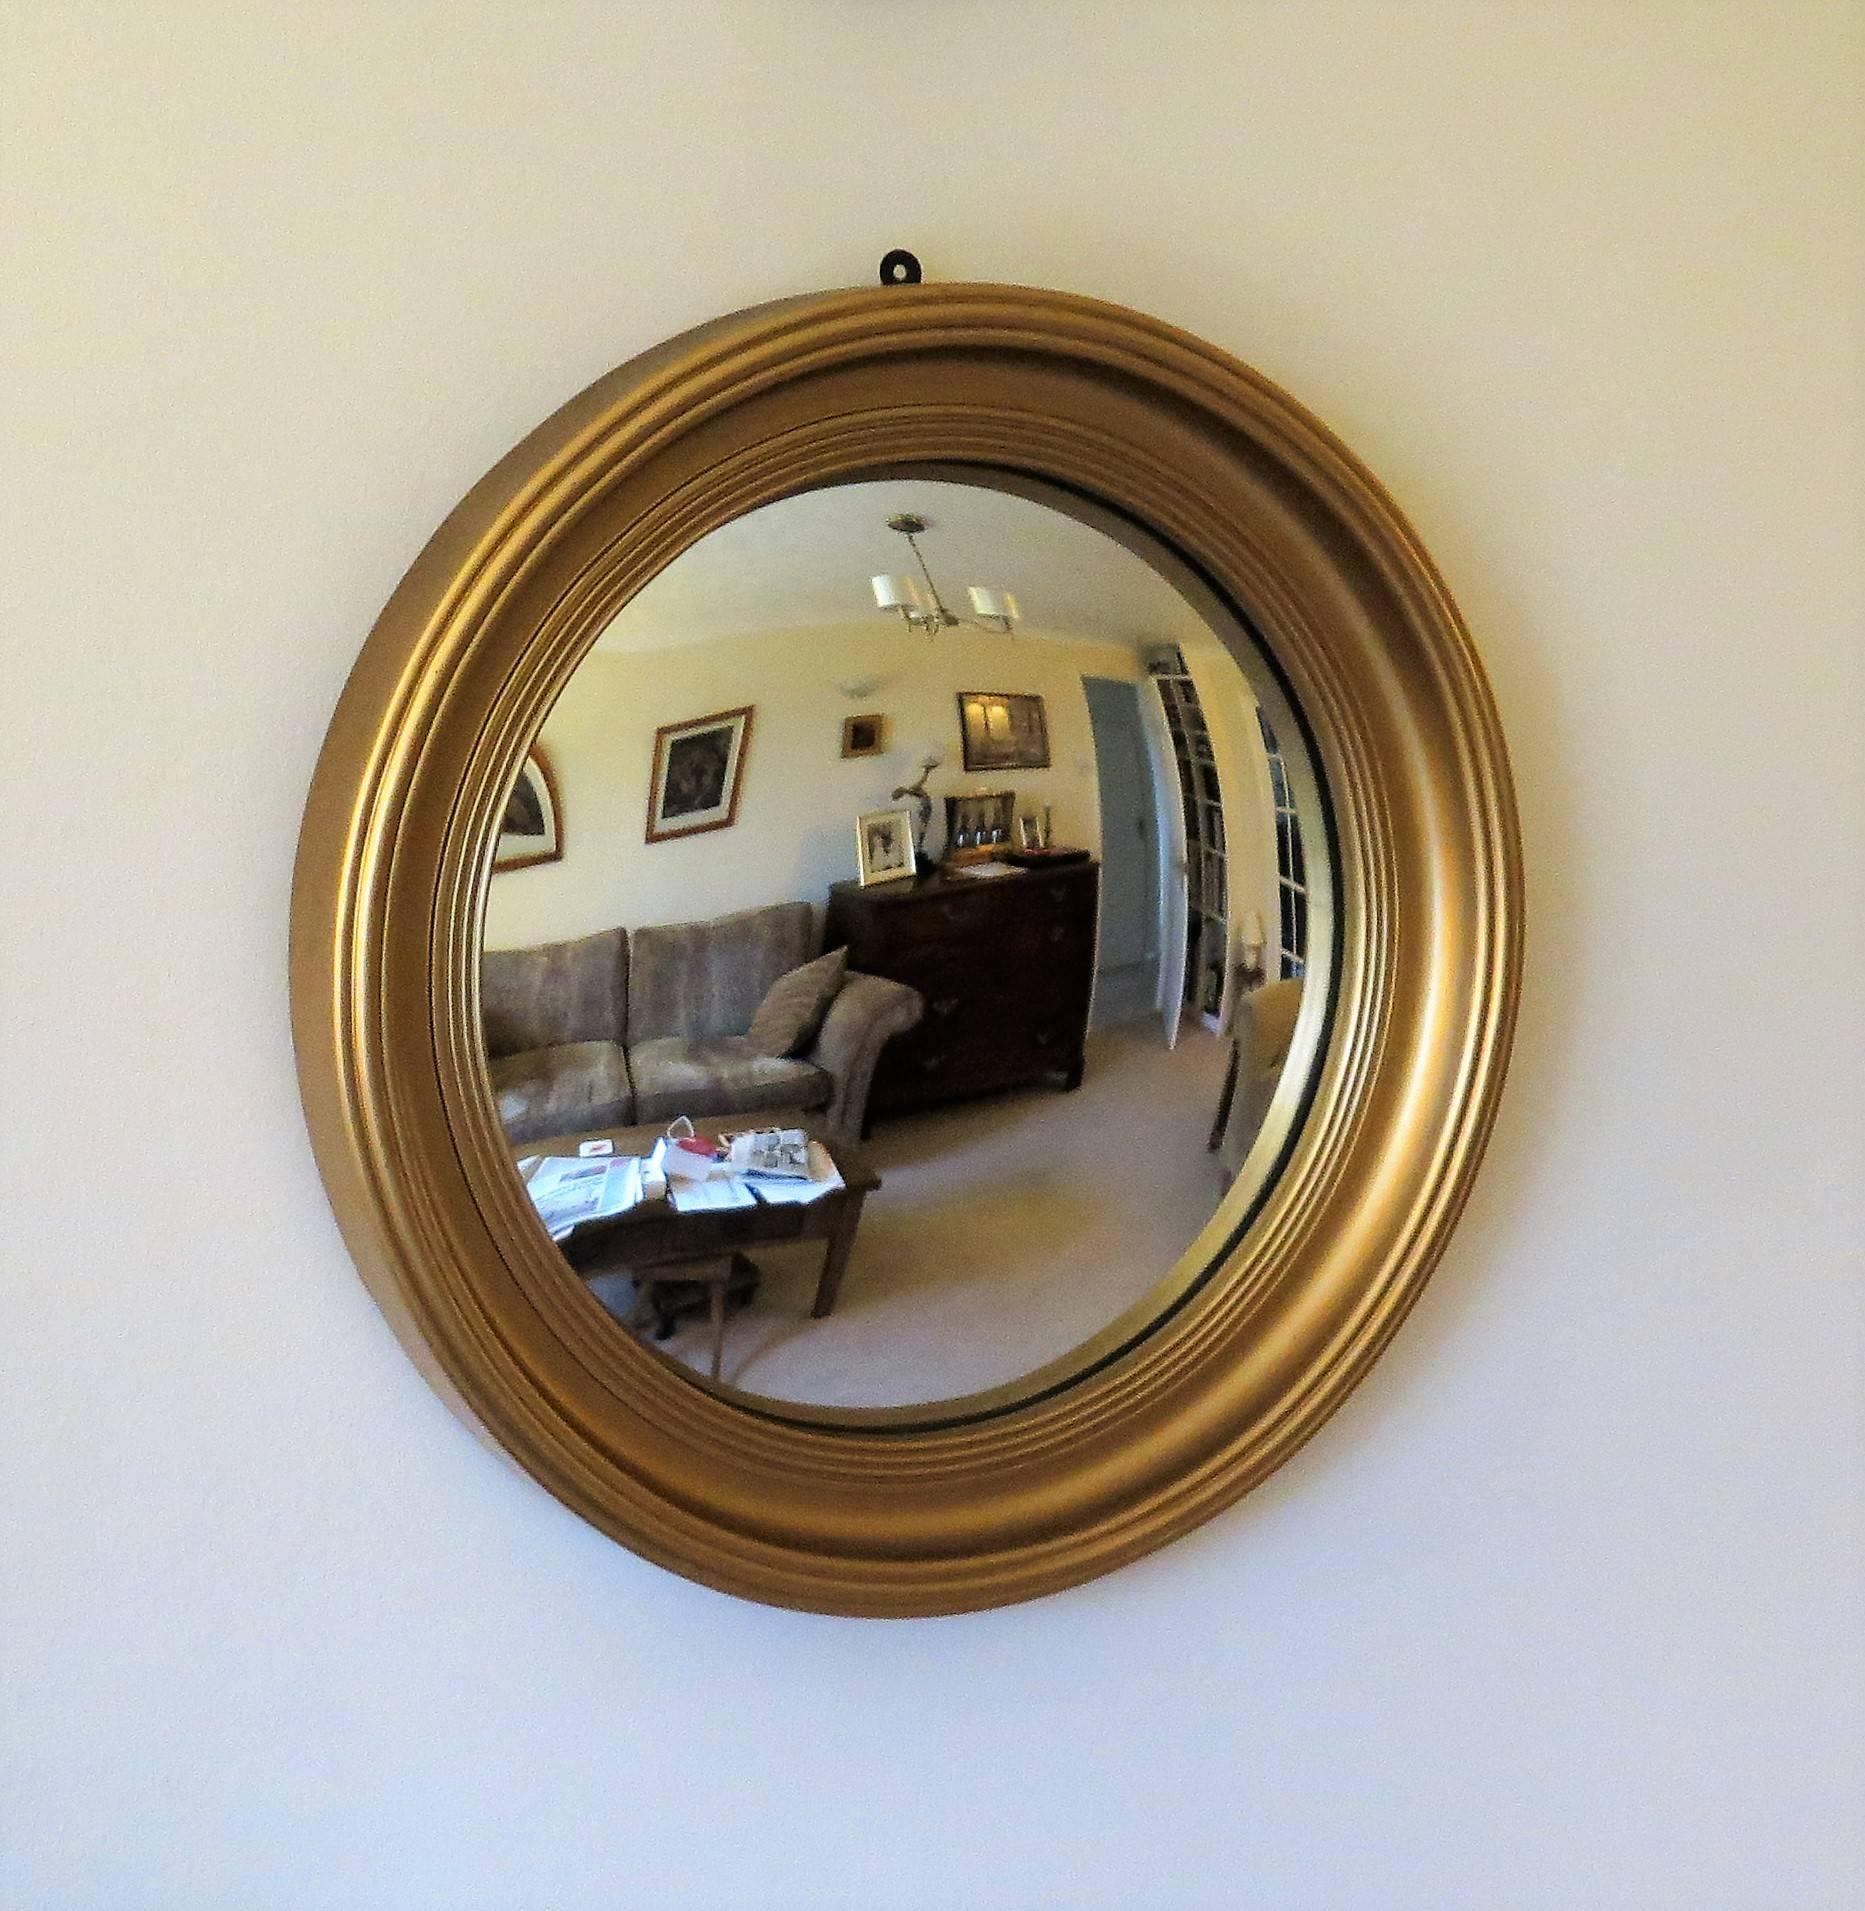 This is a very good round convex English, wall mirror made in the Regency style, dating to the early 20th century, circa 1920.

The frame is Gilt-wood with reeded detail around the inner circumference of the frame, which is a typical Regency